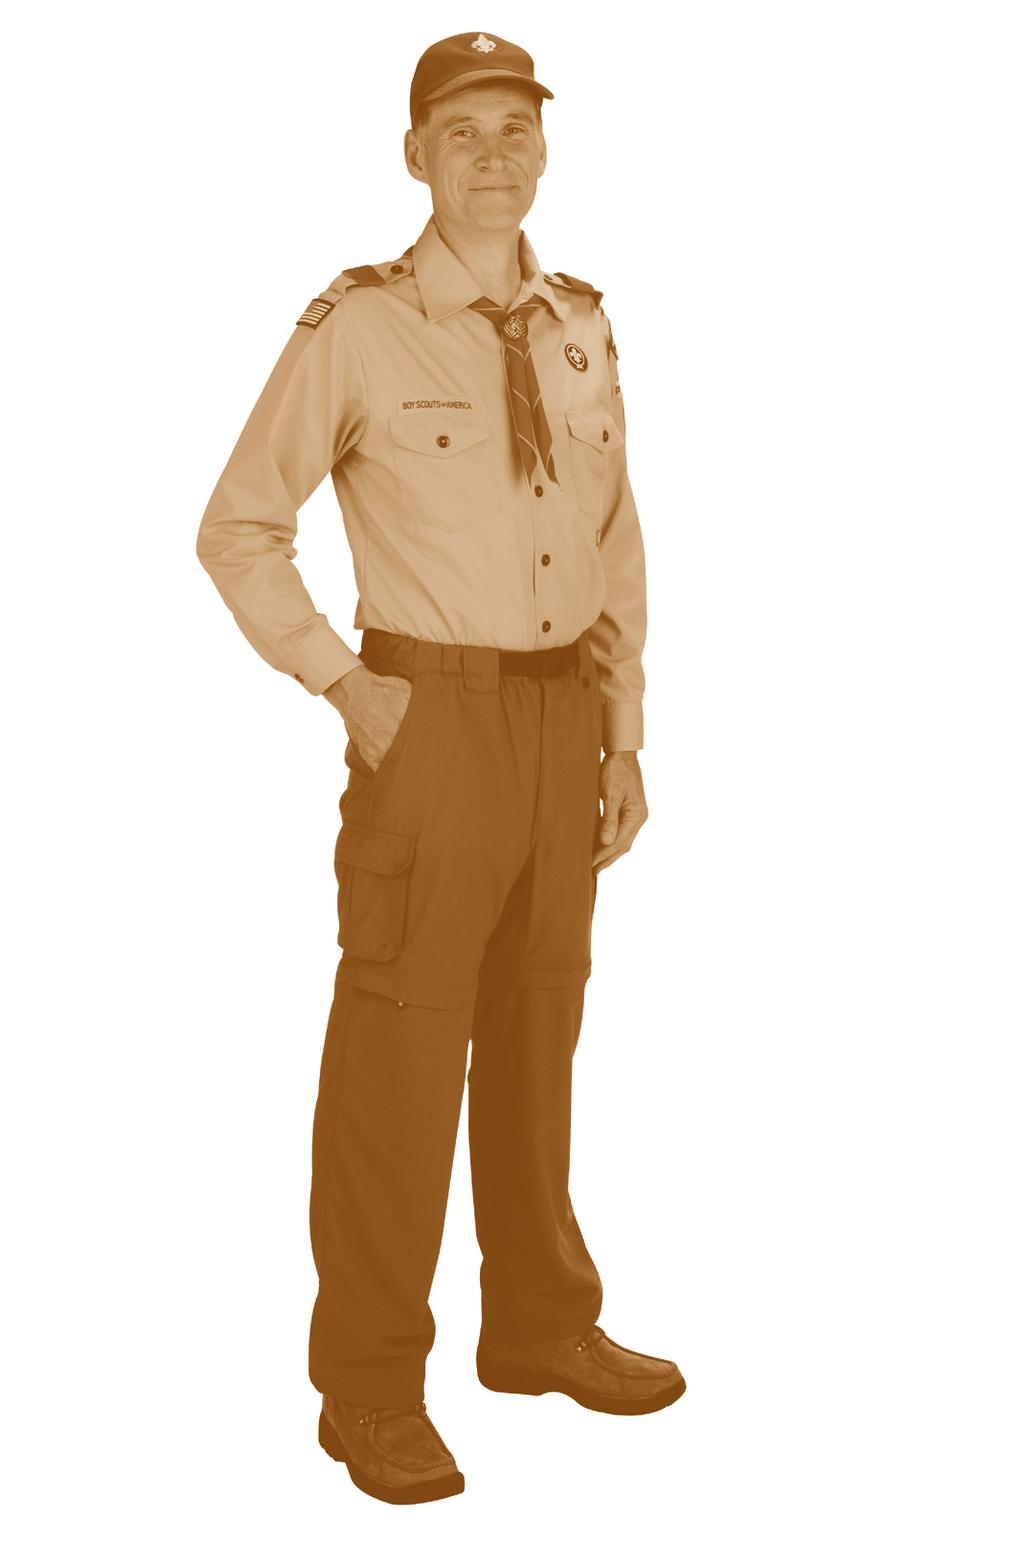 Units have no option to change. Male Cub Scout and Boy Scout leaders wear the official olive-colored shorts or pants with no cuffs.